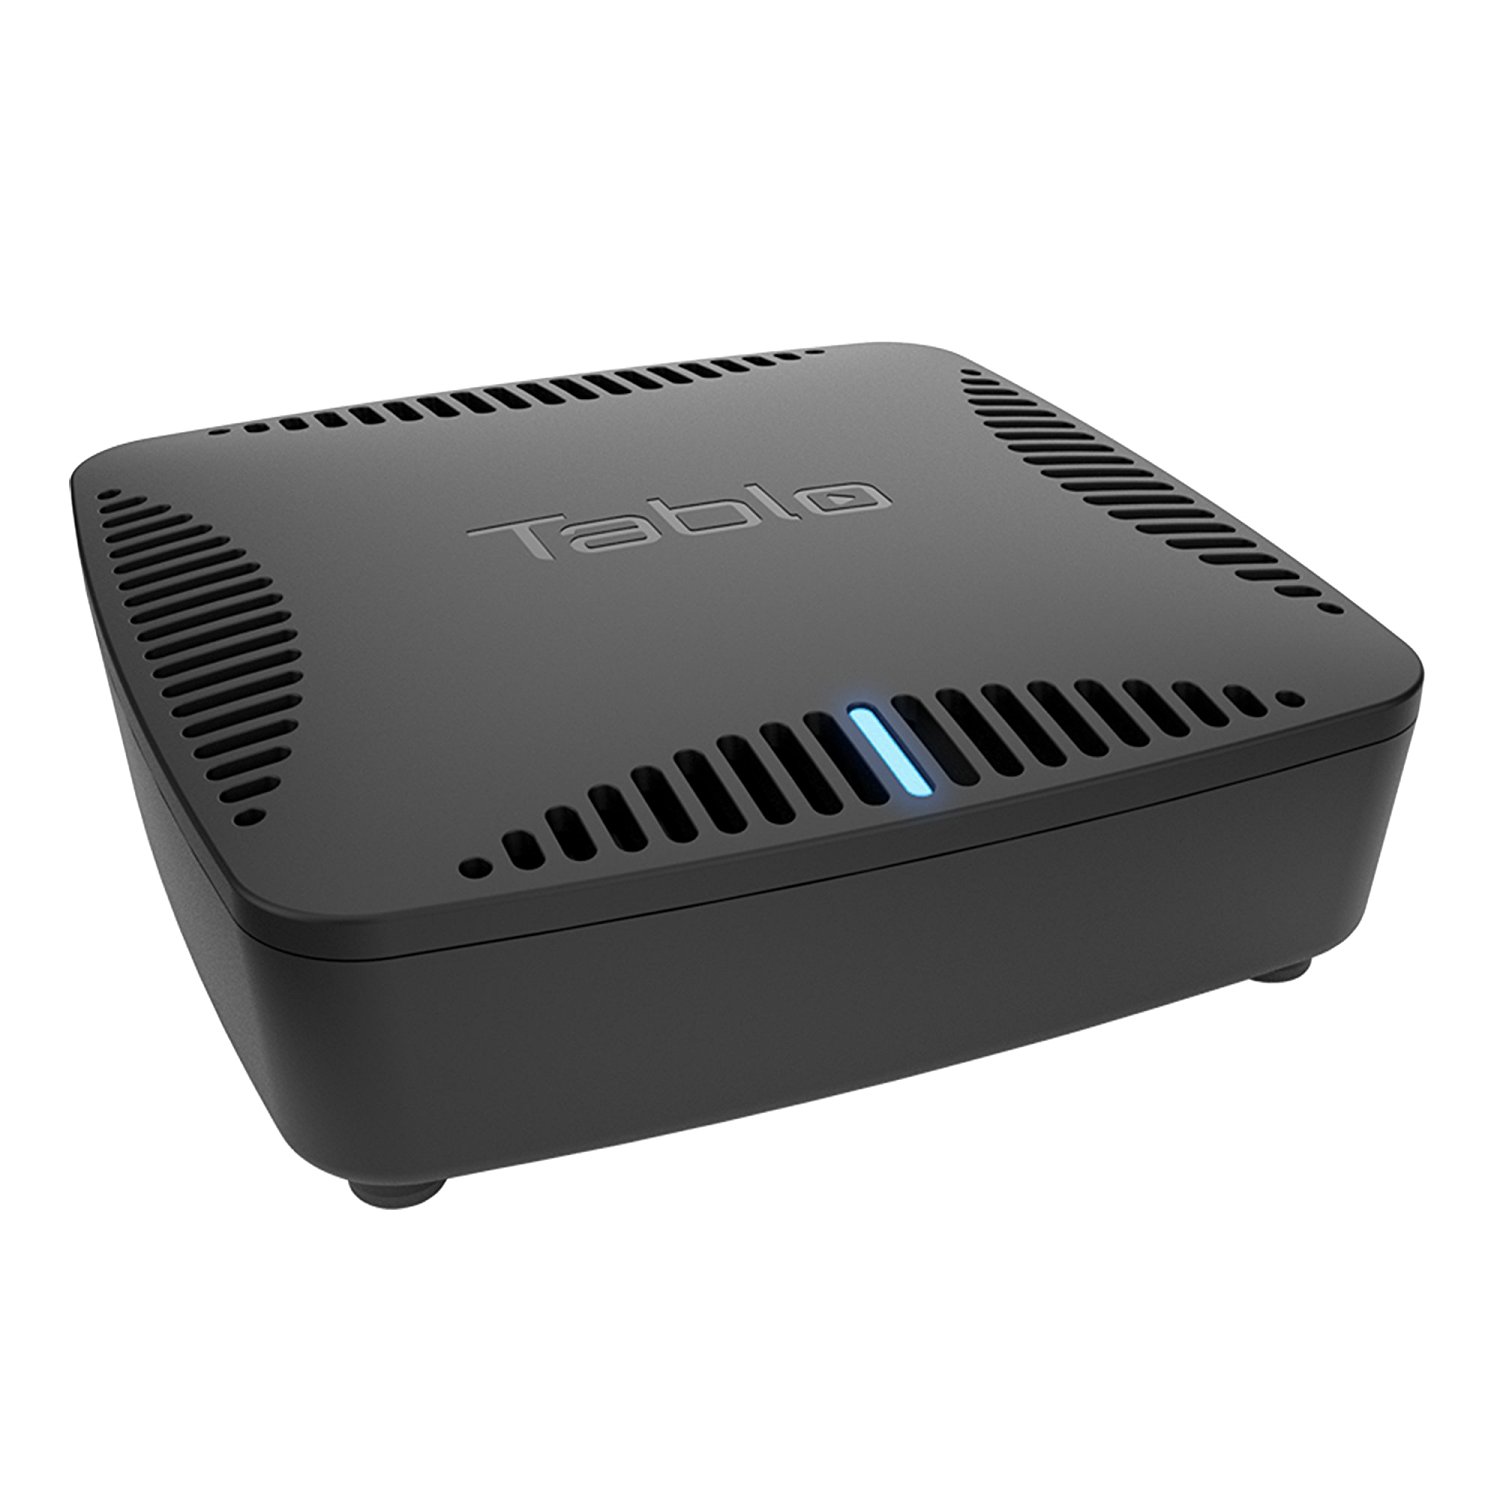 The Best Cord Cutting DVR of 2018 Is Tablo DVR Beating Out TiVo, & More (Cordie Award Winners)